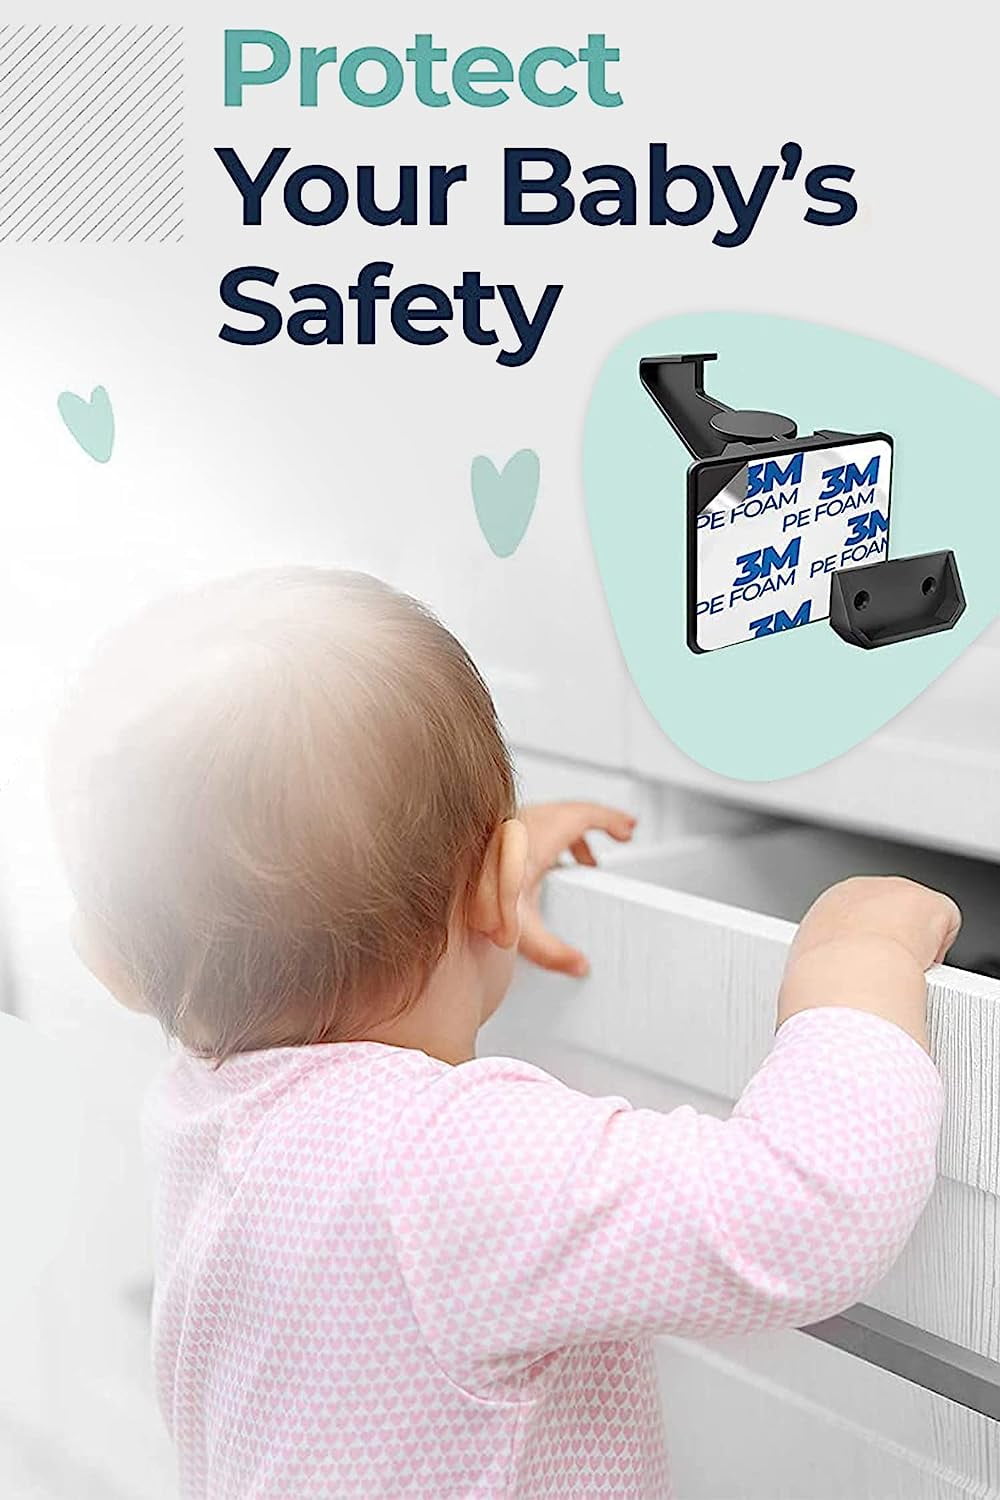 Child Locks for Cabinets and Drawers - 12 Pack - No Drill Baby Proofing  Cabinets, Make Baby Safety Easy with Baby Cabinet Locks, These Cabinet  Child